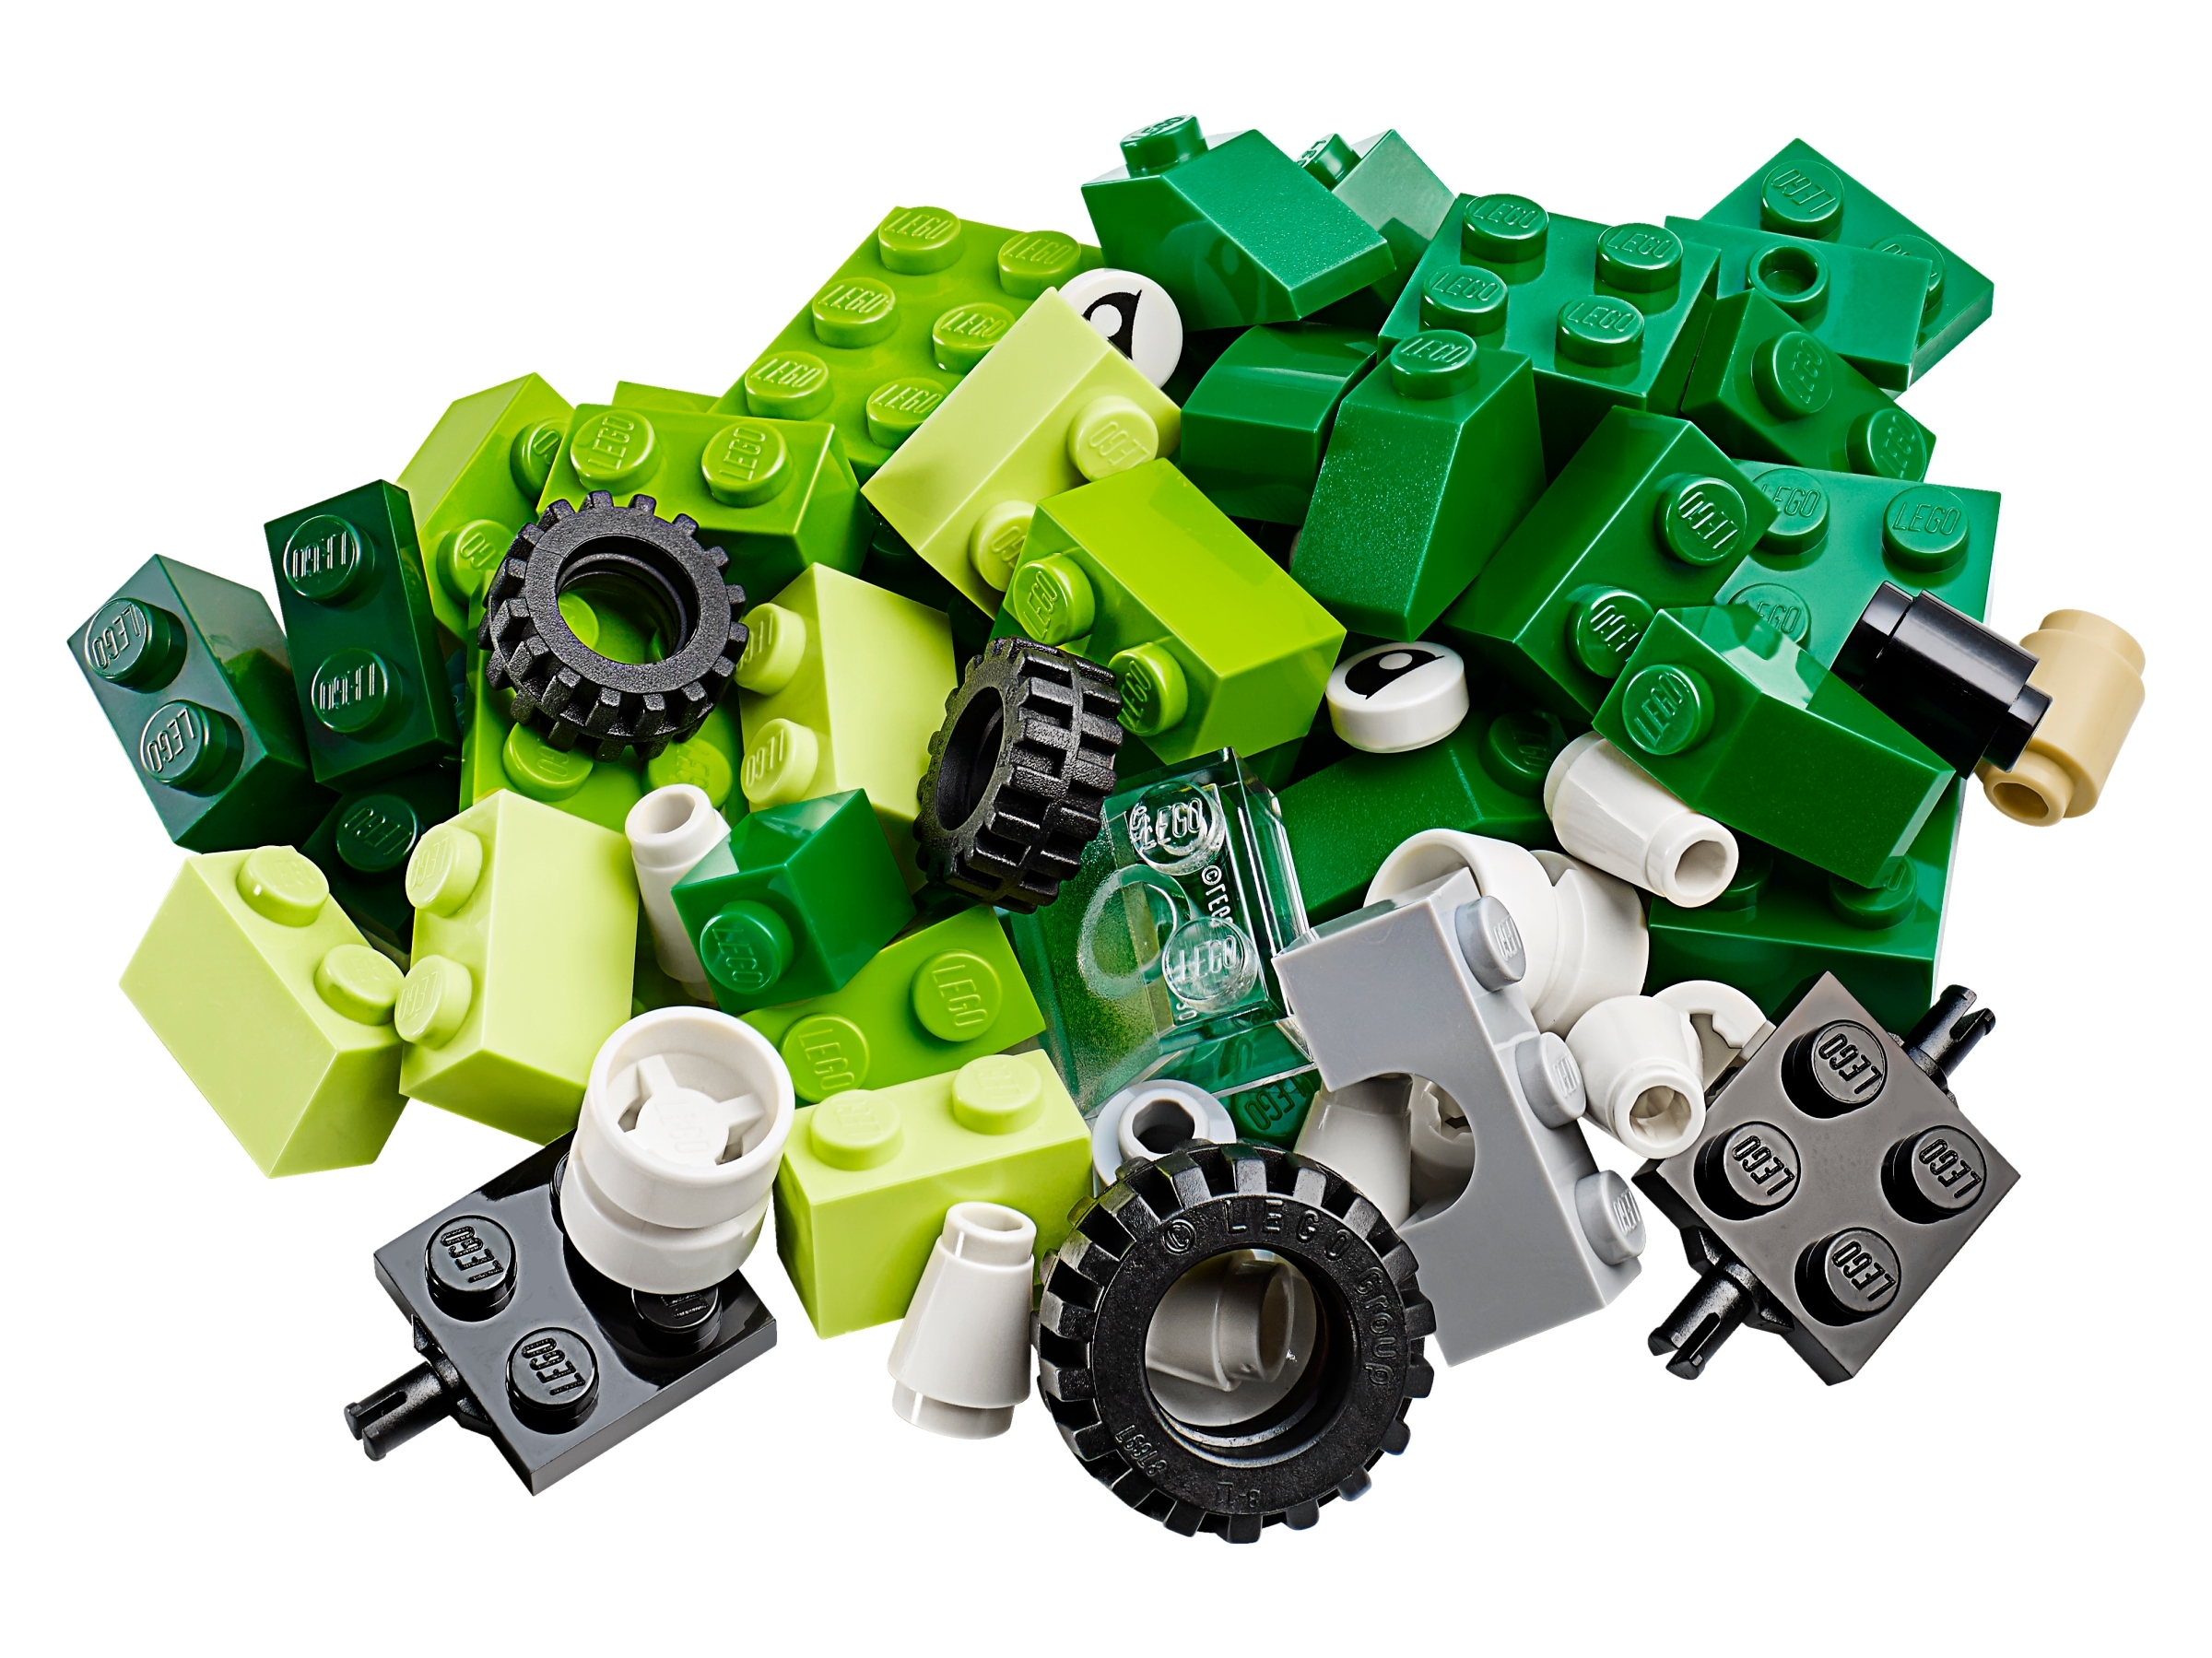 LEGO Classic Creativity Sets 10706 Blue & 10708 Green for sale online 